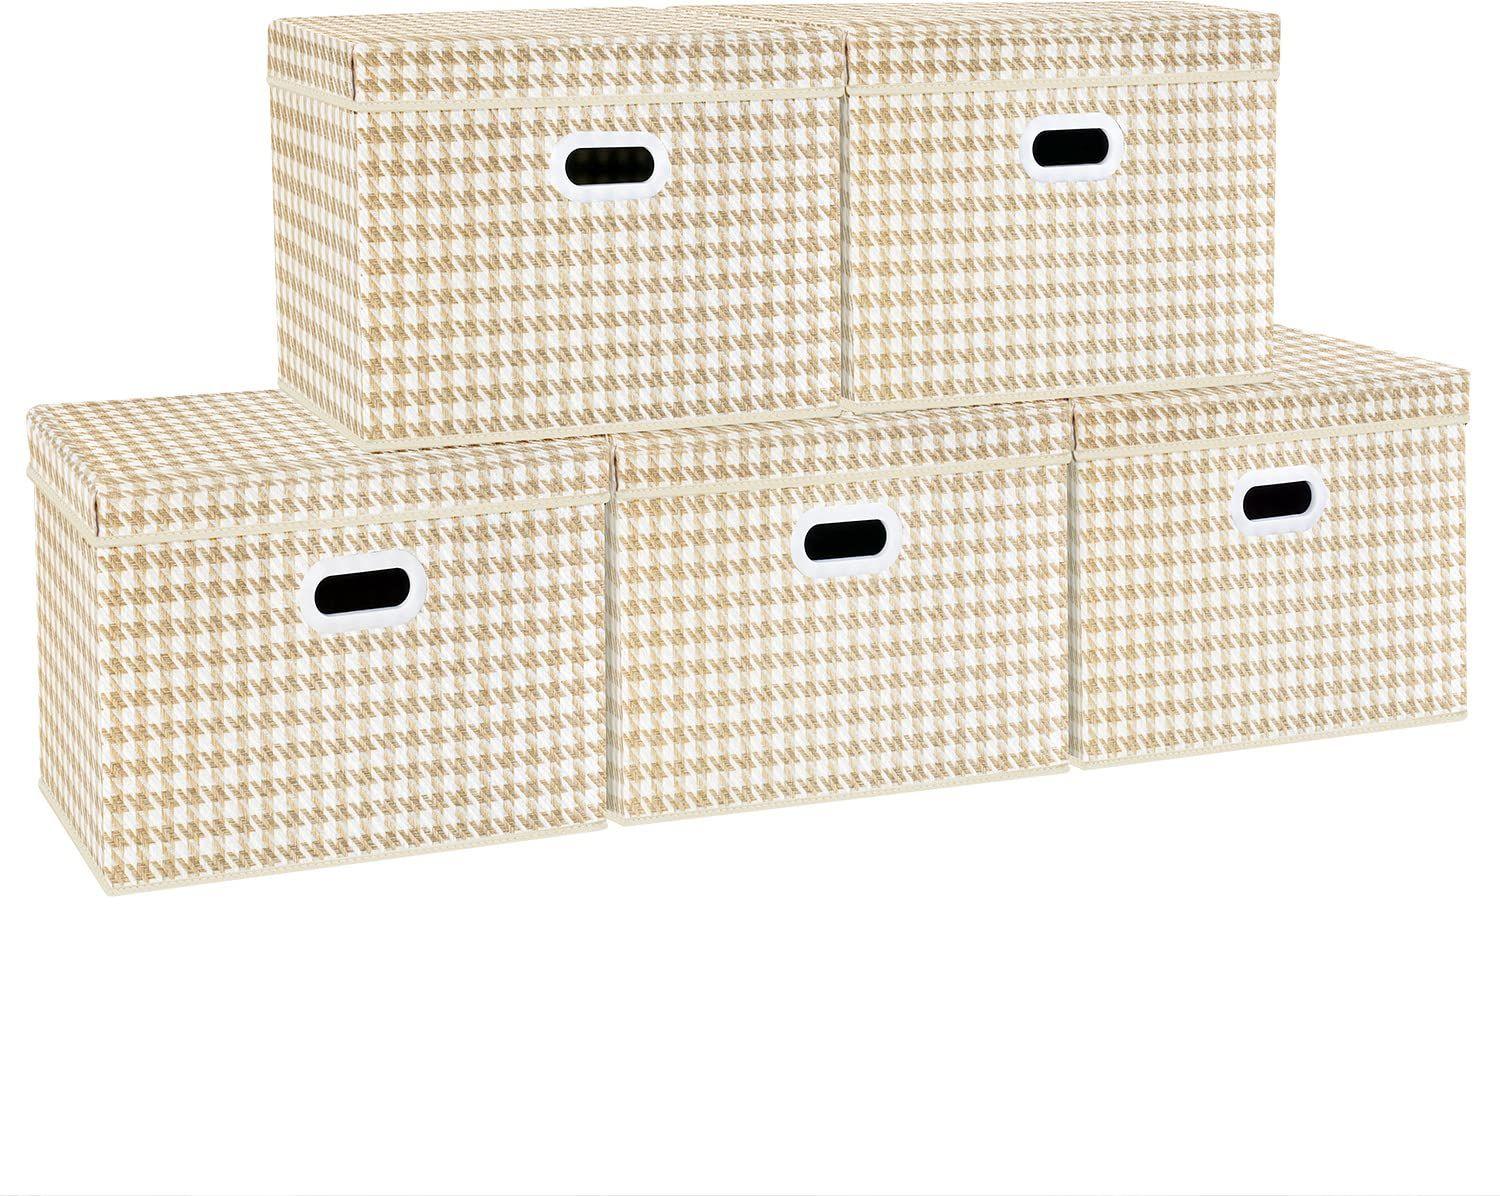 TYEERS Collapsible Large Storage Box with Lid, Patterns, Fabric Storage Box for Clothes Storage, Wardrobe Storage, 44x30x29 cm, Set of 5, Beige